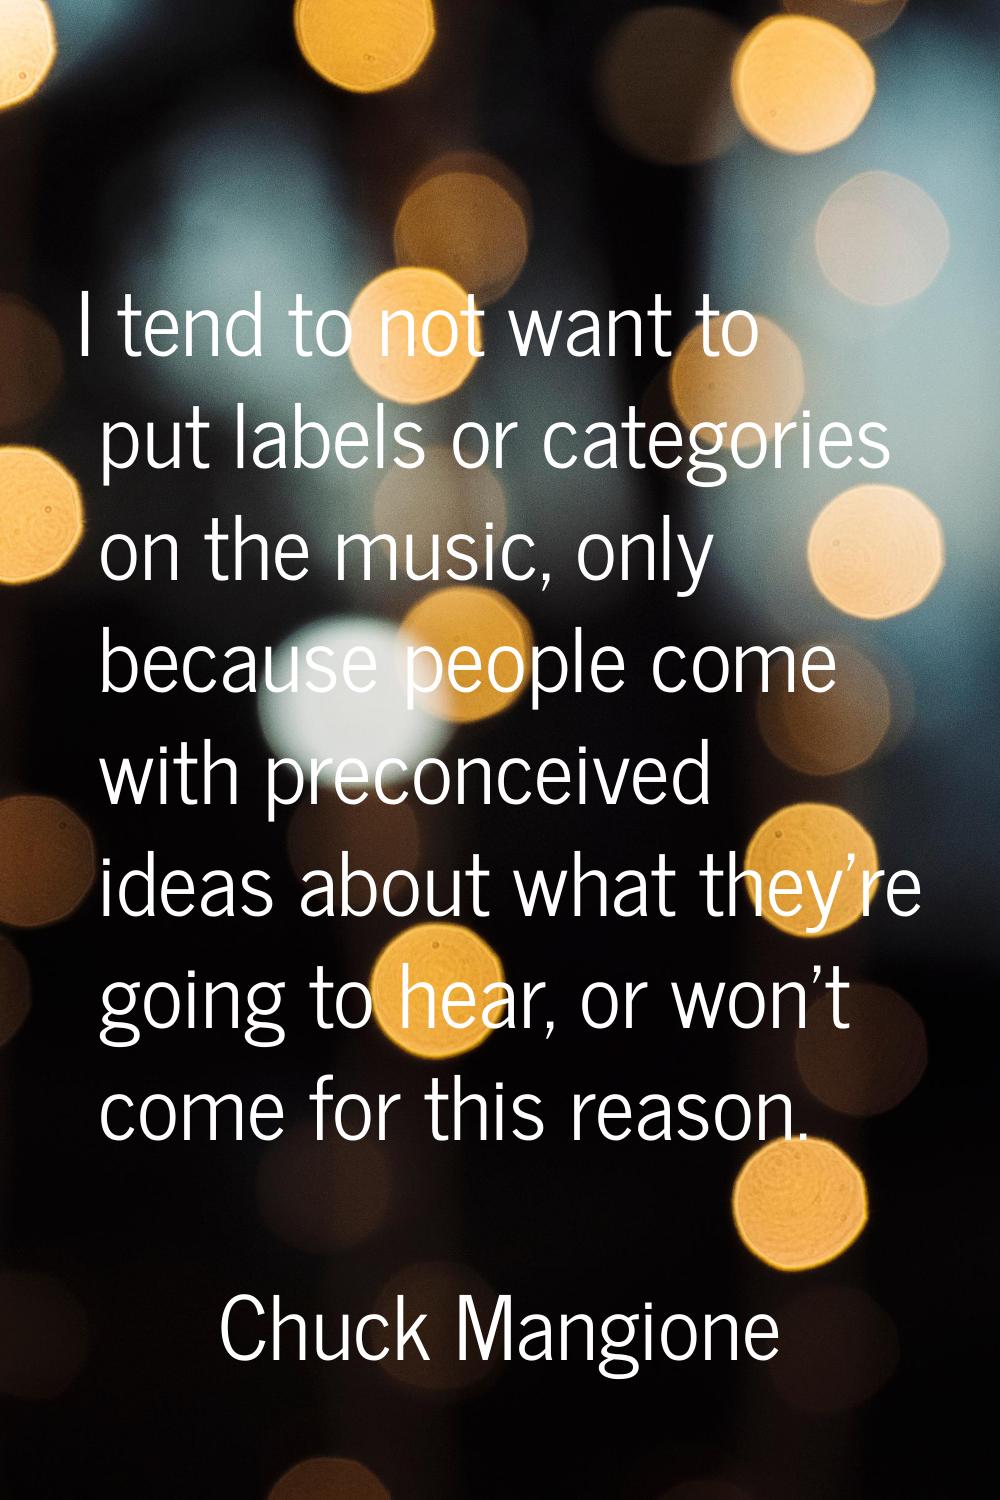 I tend to not want to put labels or categories on the music, only because people come with preconce